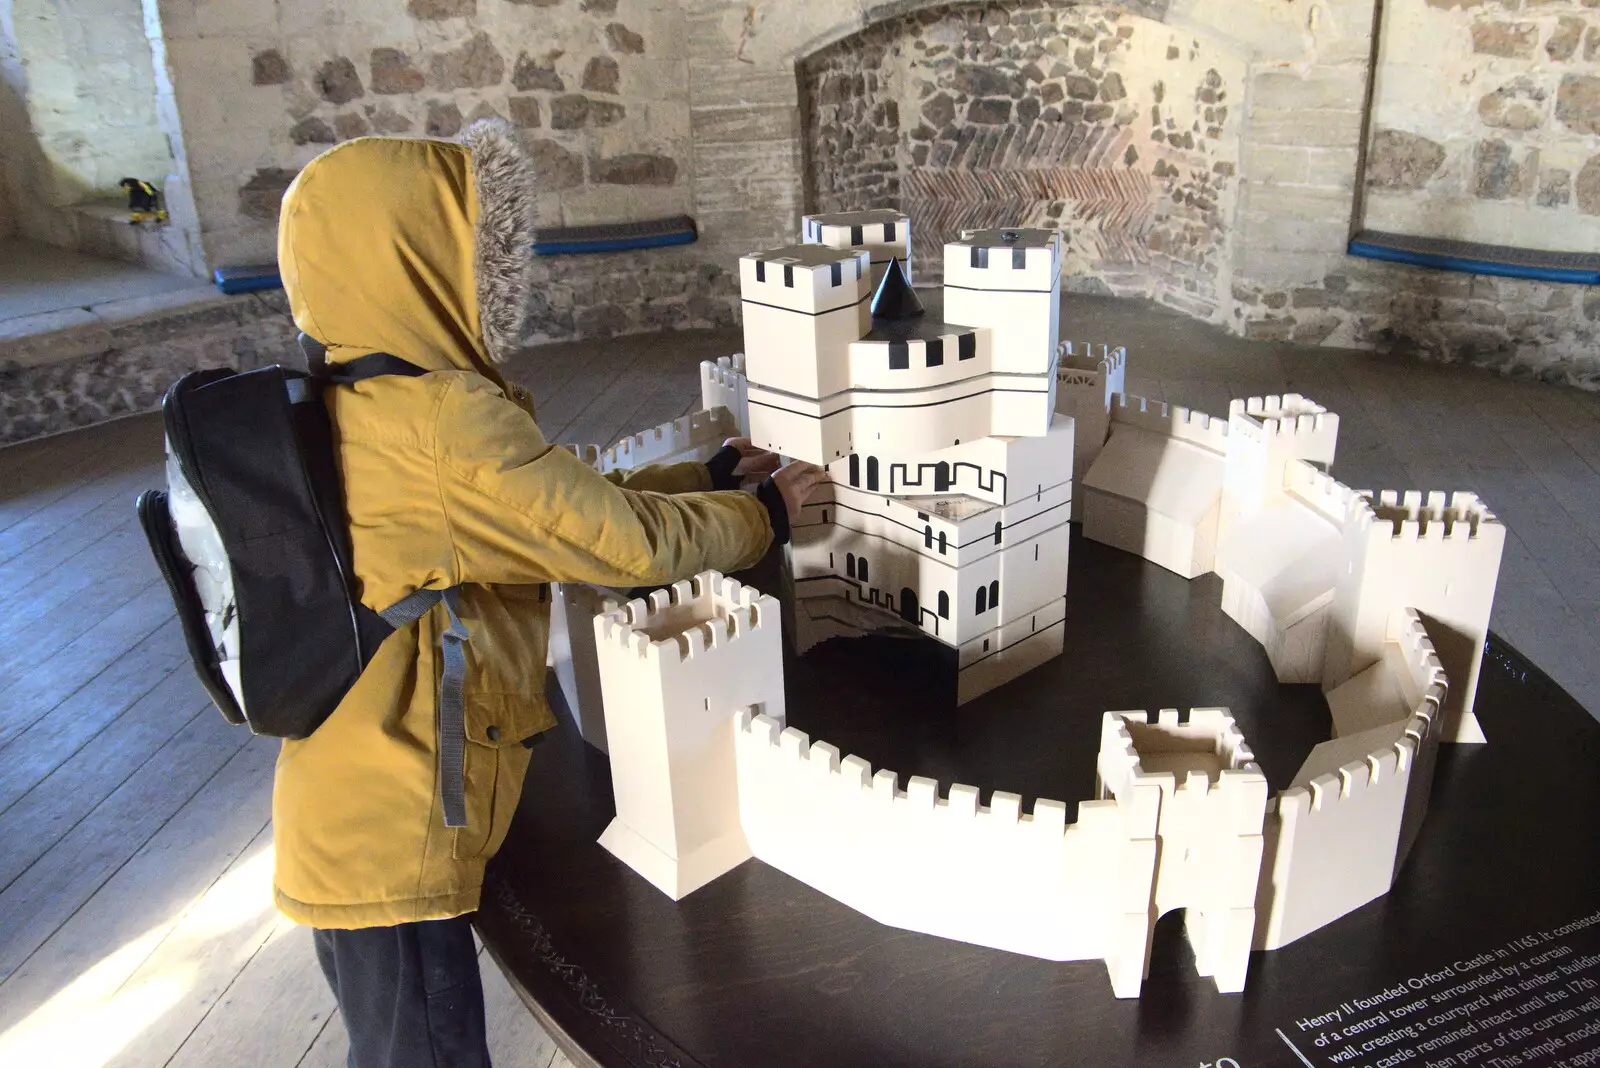 There's an interactive model of the castle, from A Trip to Orford Castle, Orford, Suffolk - 26th February 2022